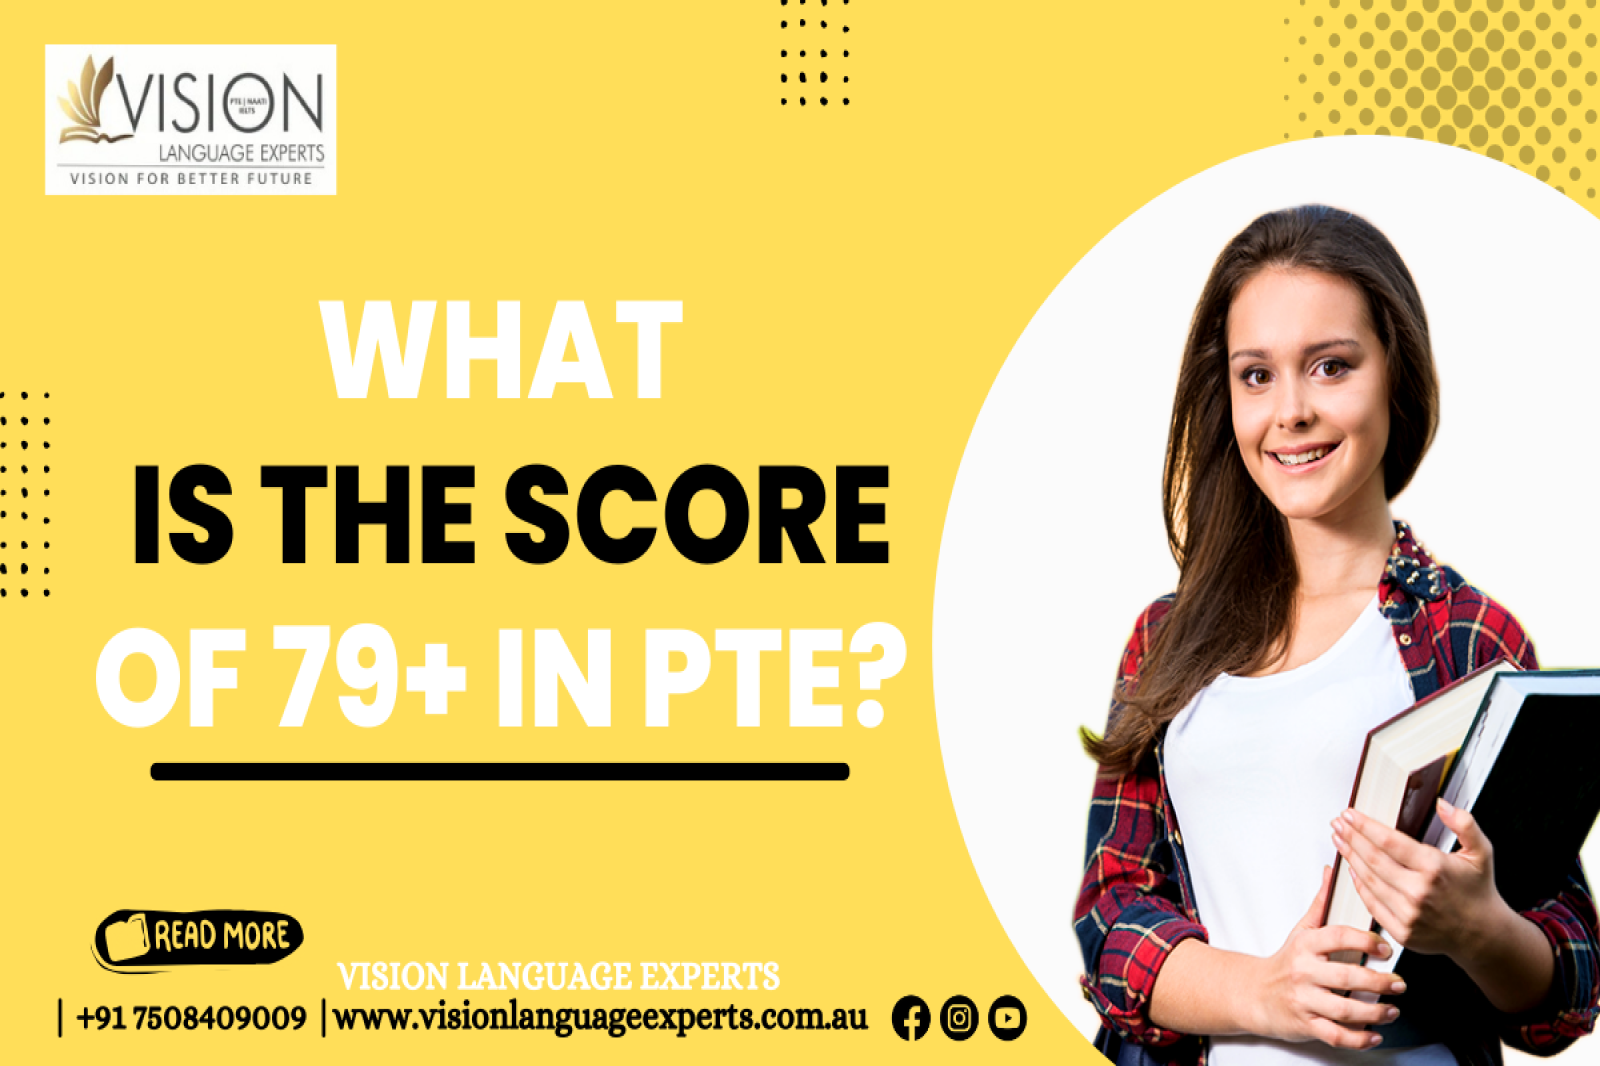 What is the score of 79 plus in PTE?